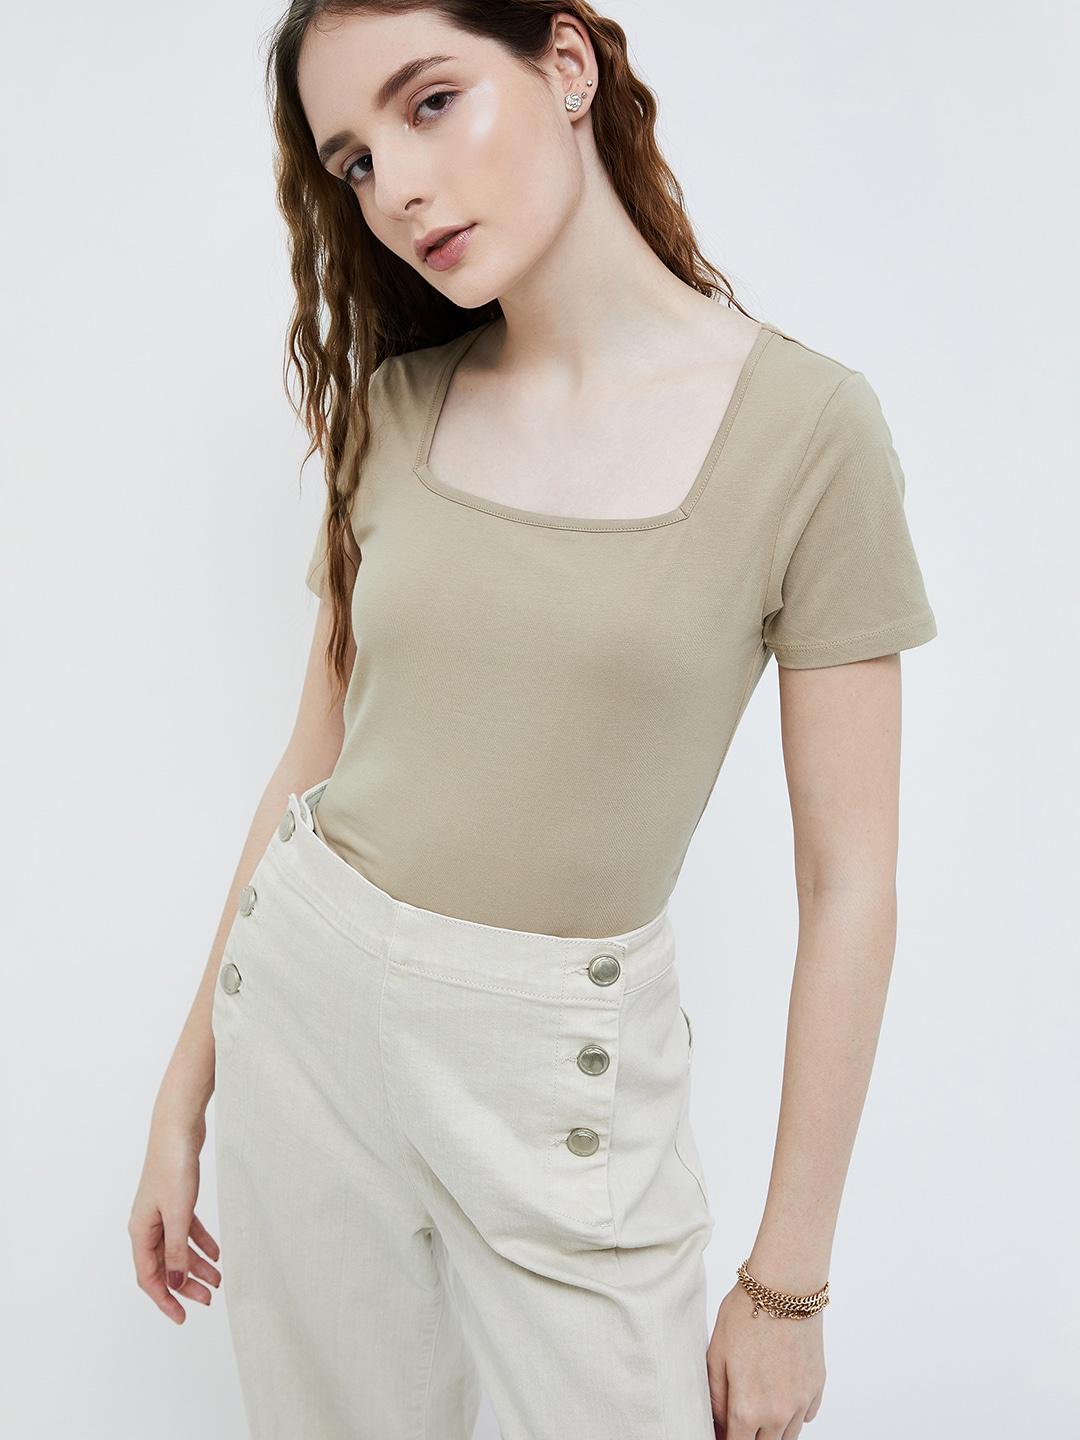 ginger-by-lifestyle-square-neck-cotton-top